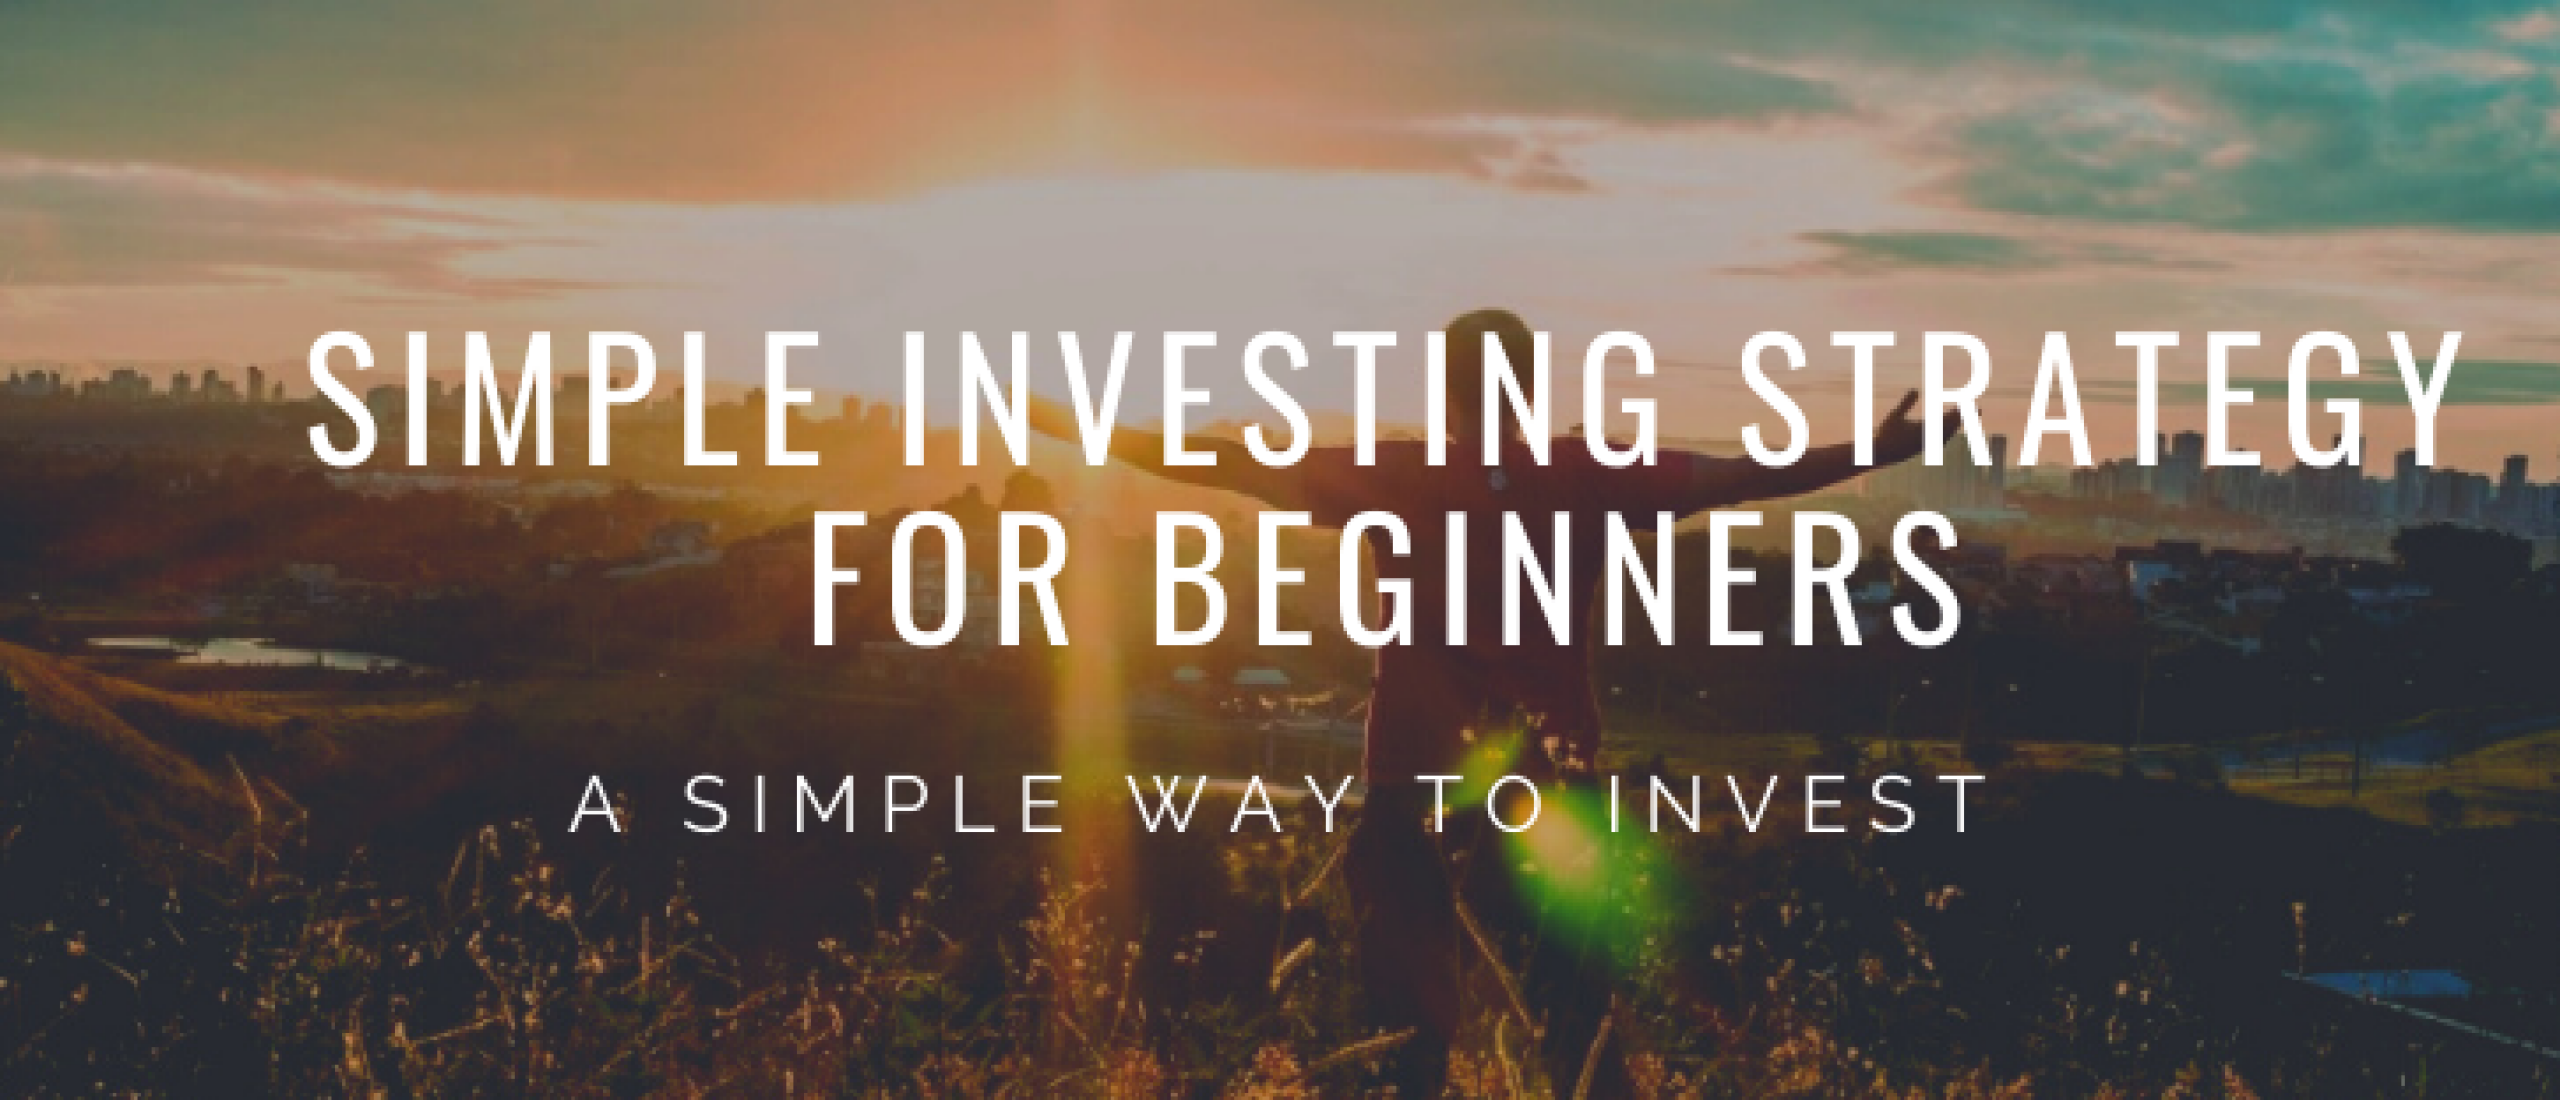 Simple Investing Strategy for Beginners | Happy Investors